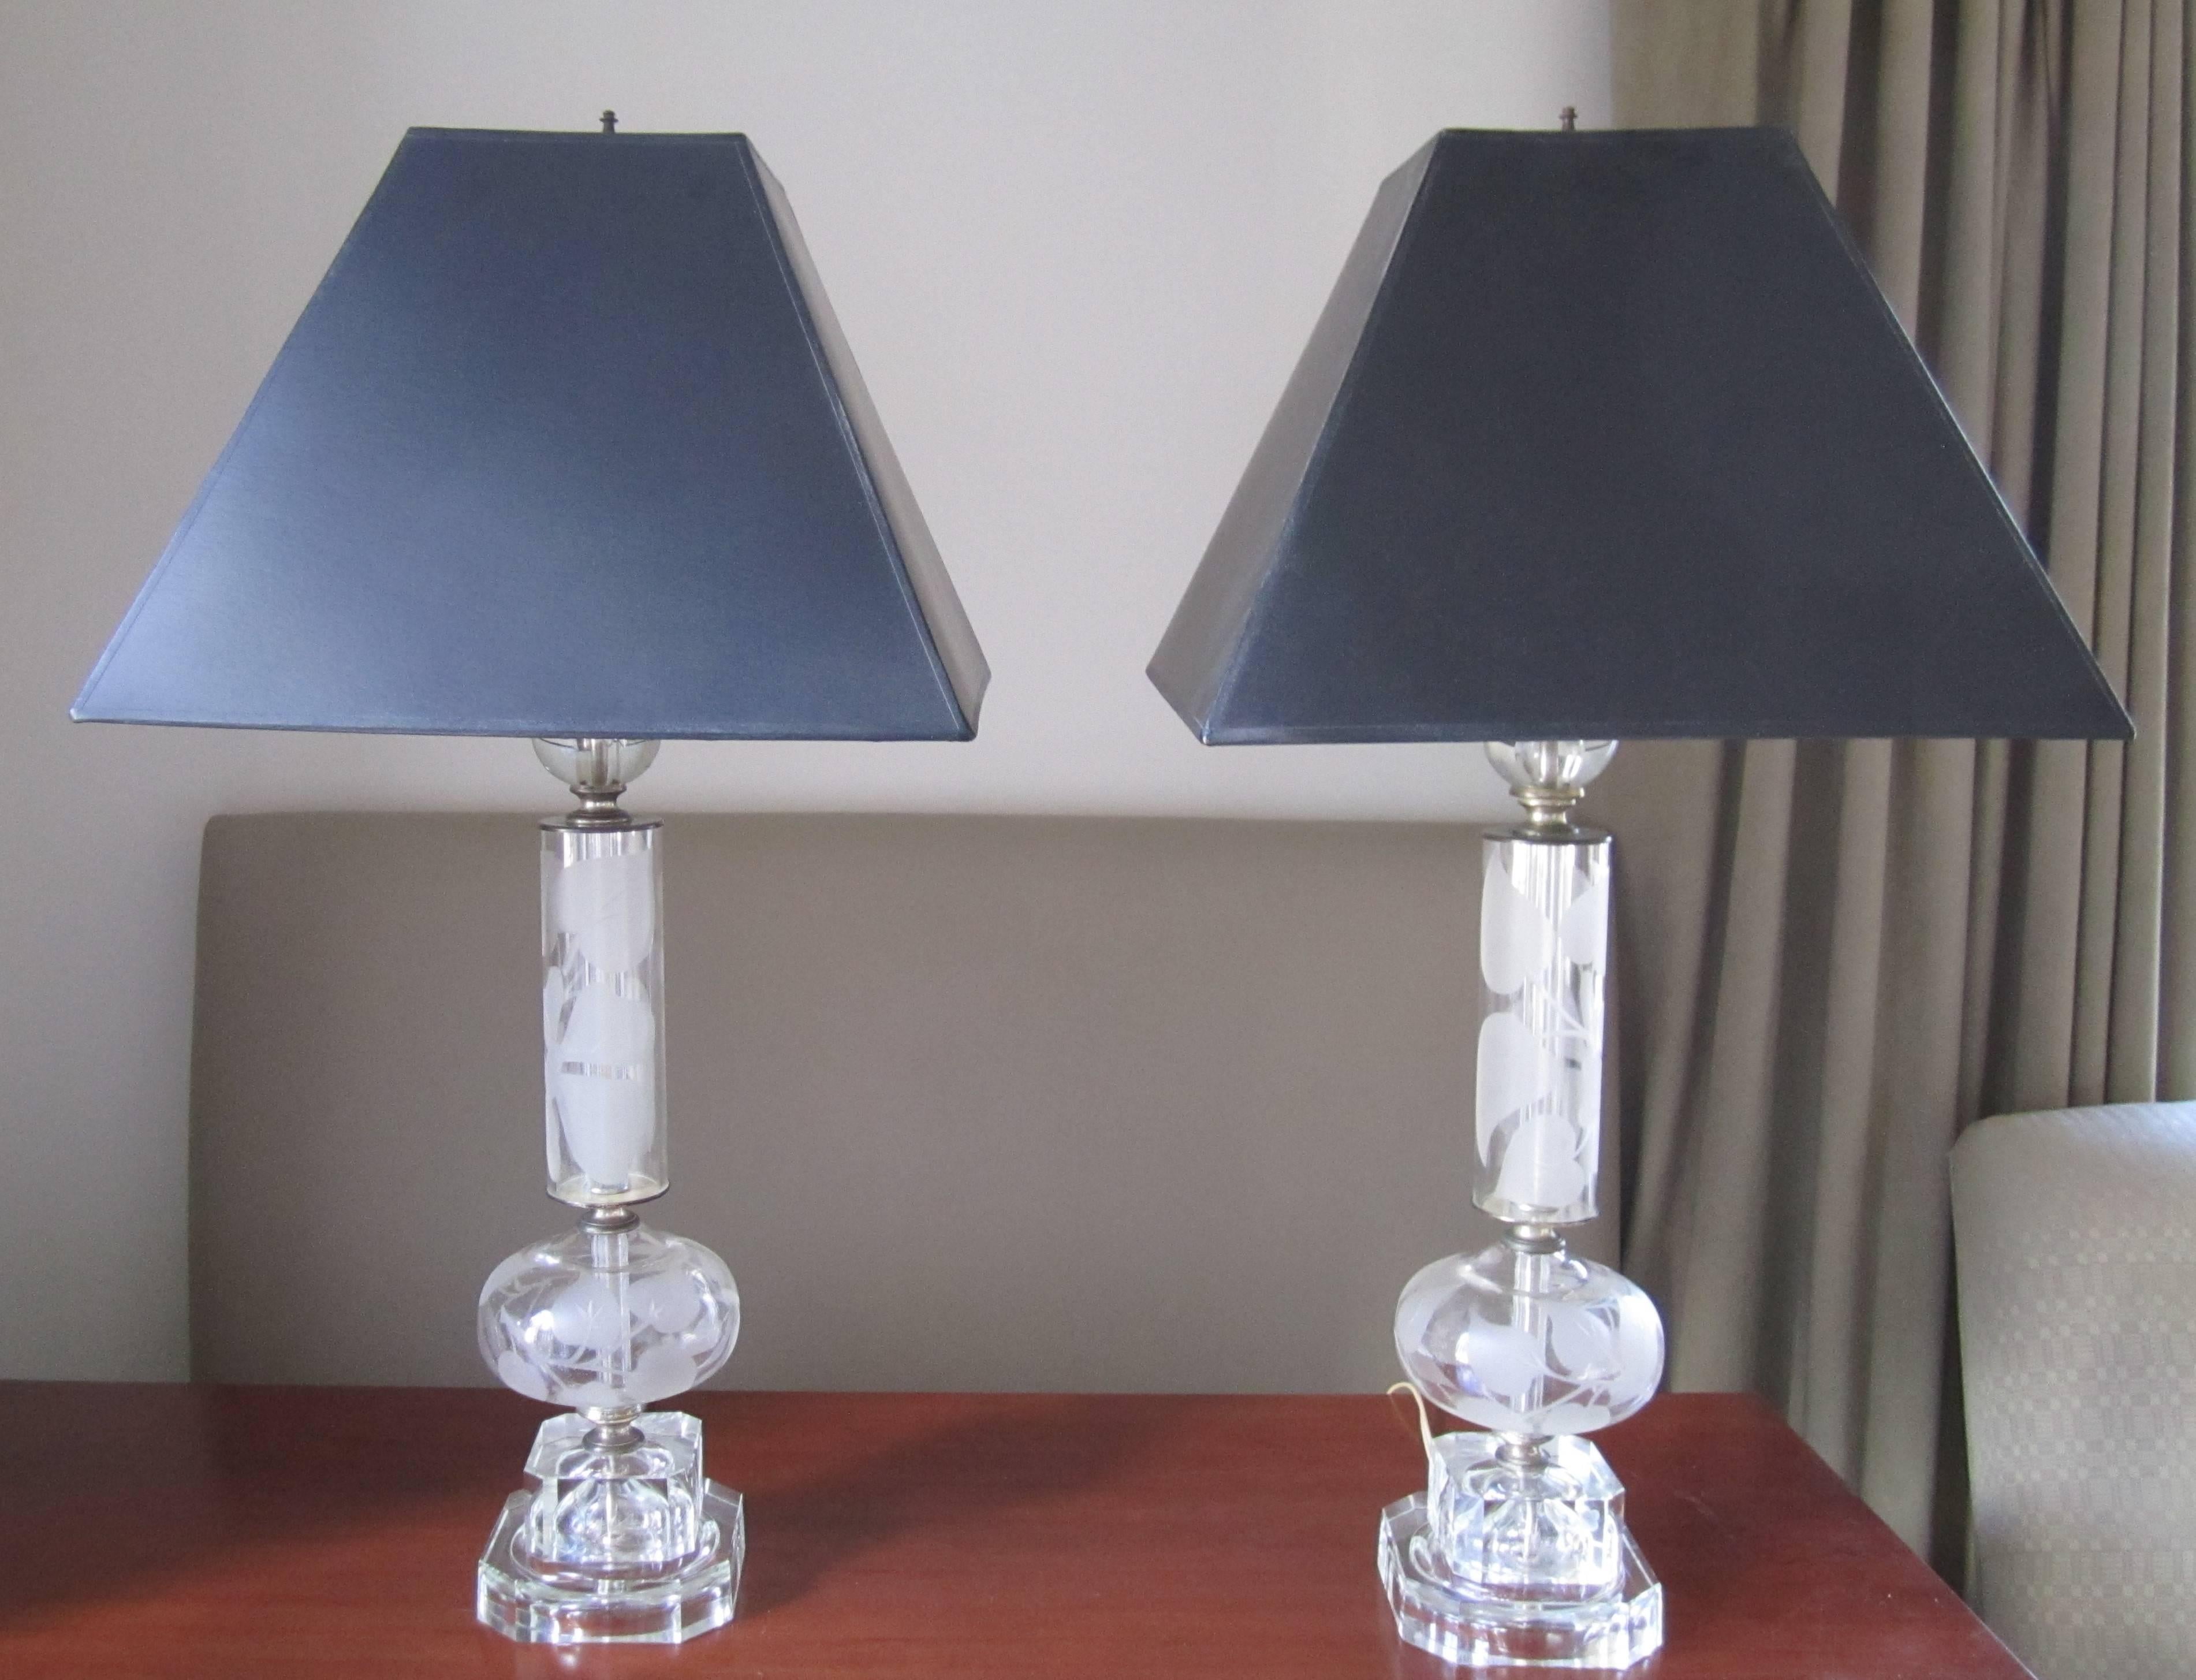 1940s lamps